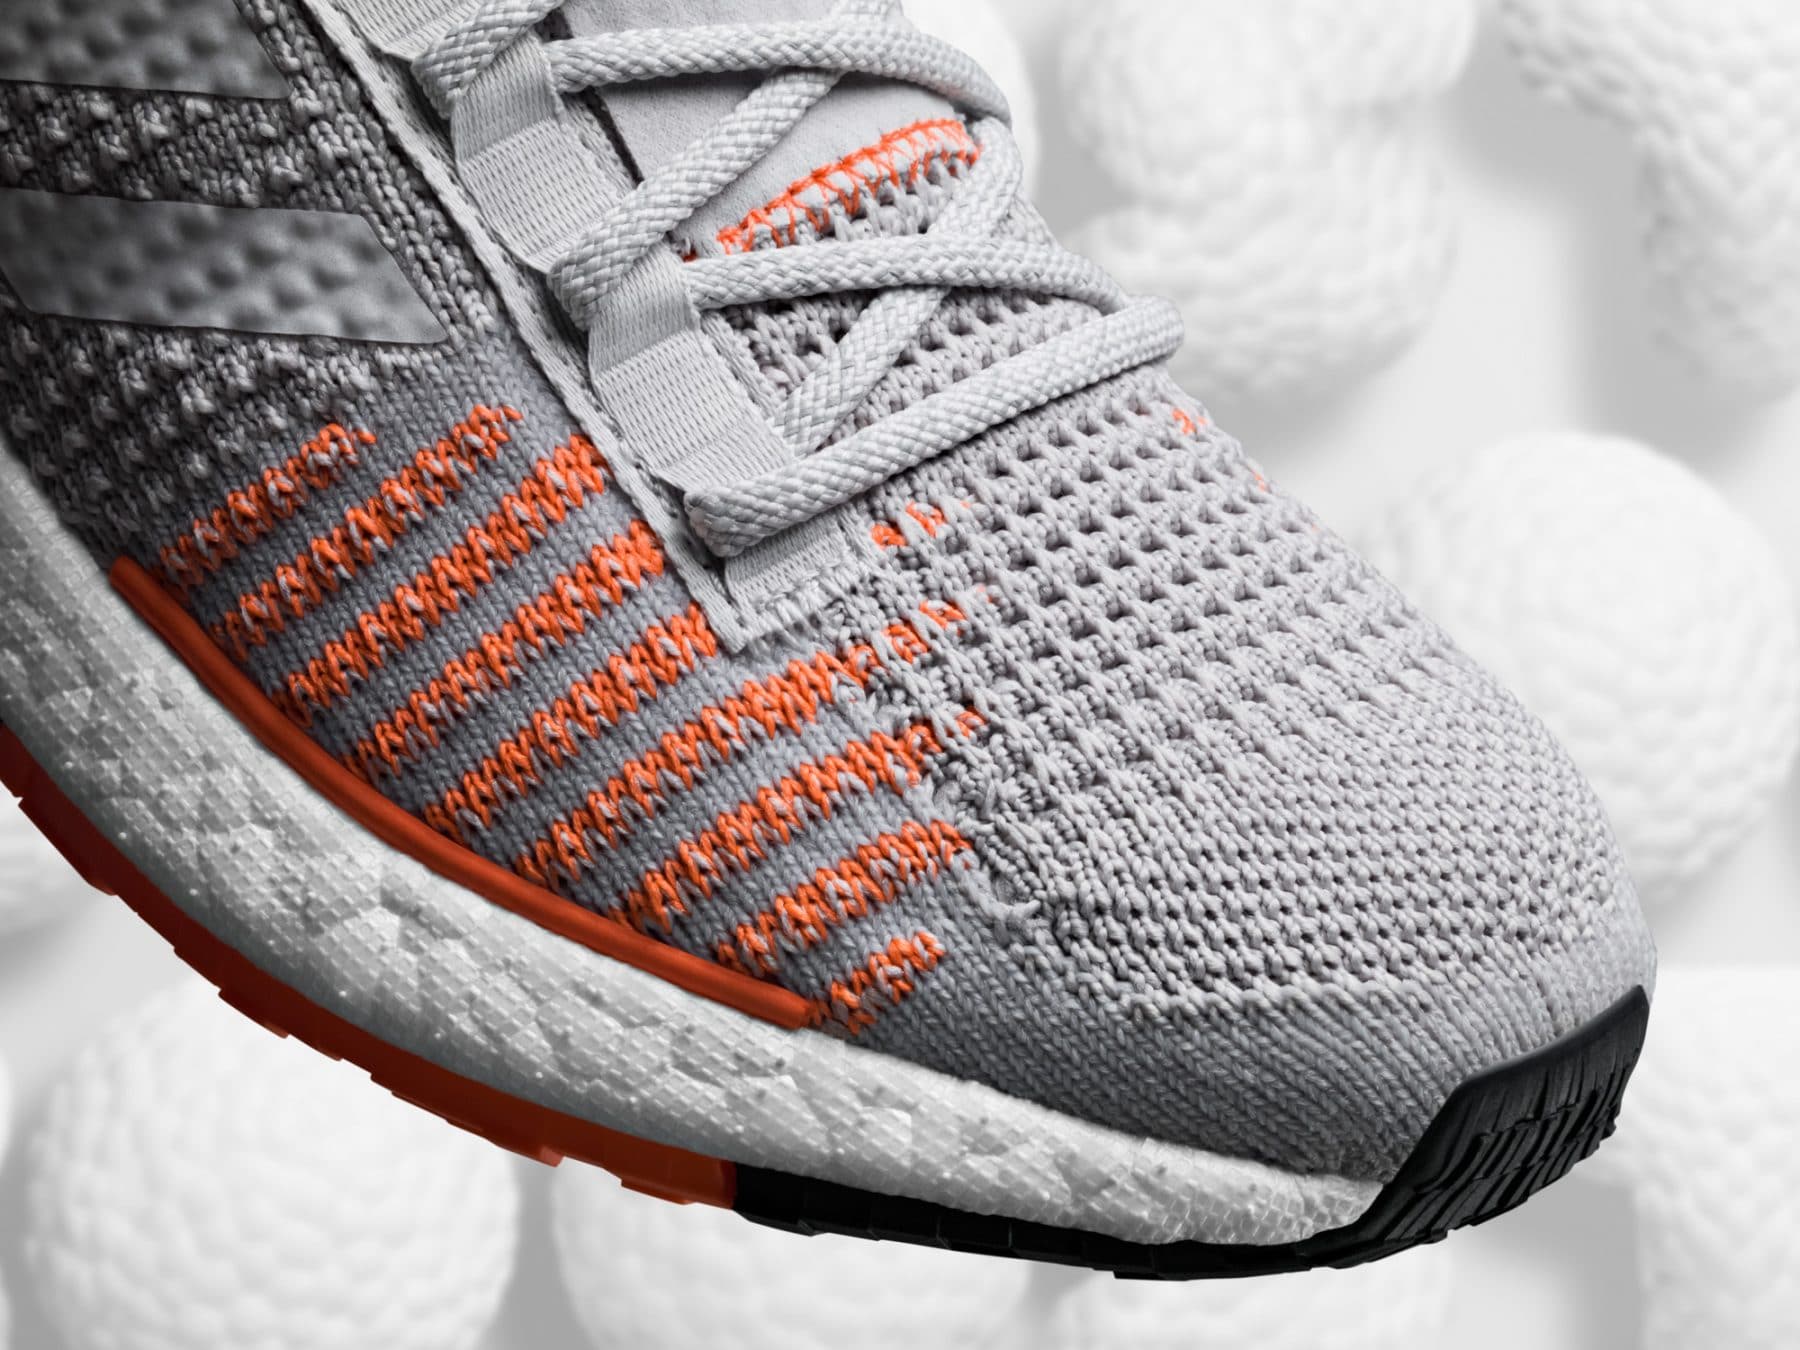 adidas pure boost hd review